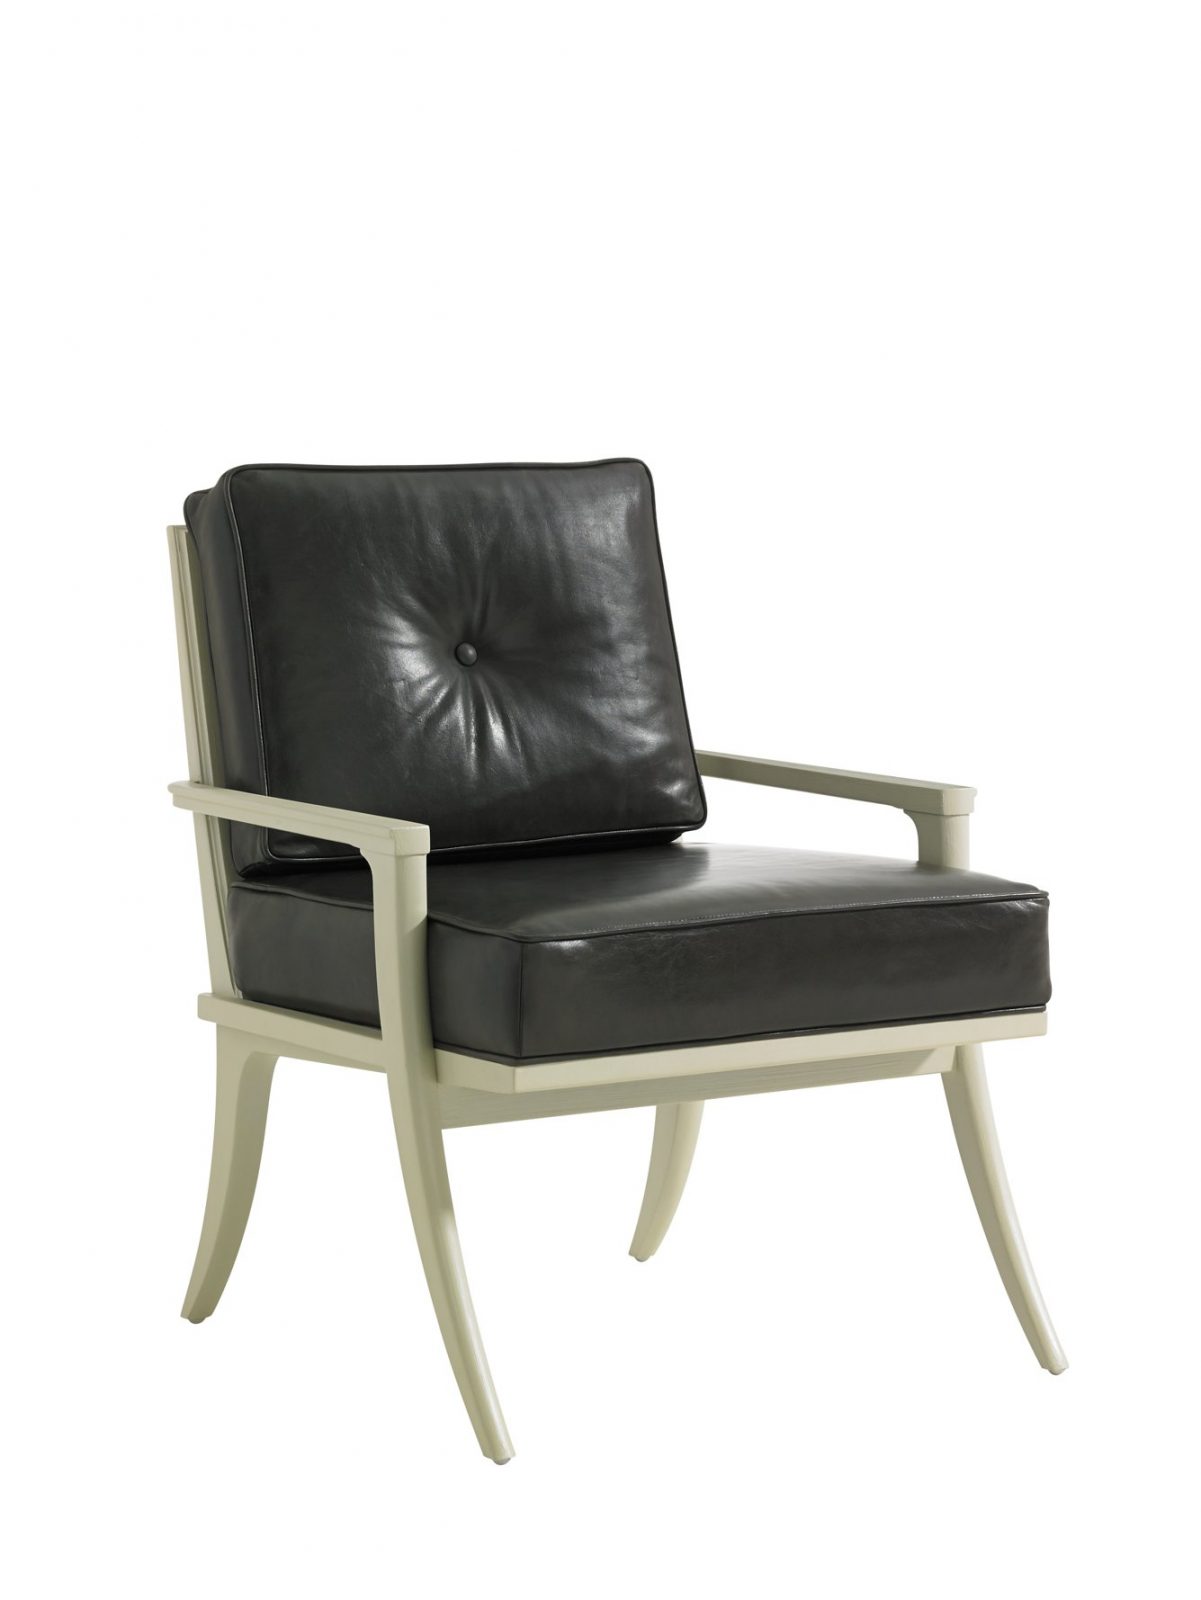 Crestaire Lena Accent Chair